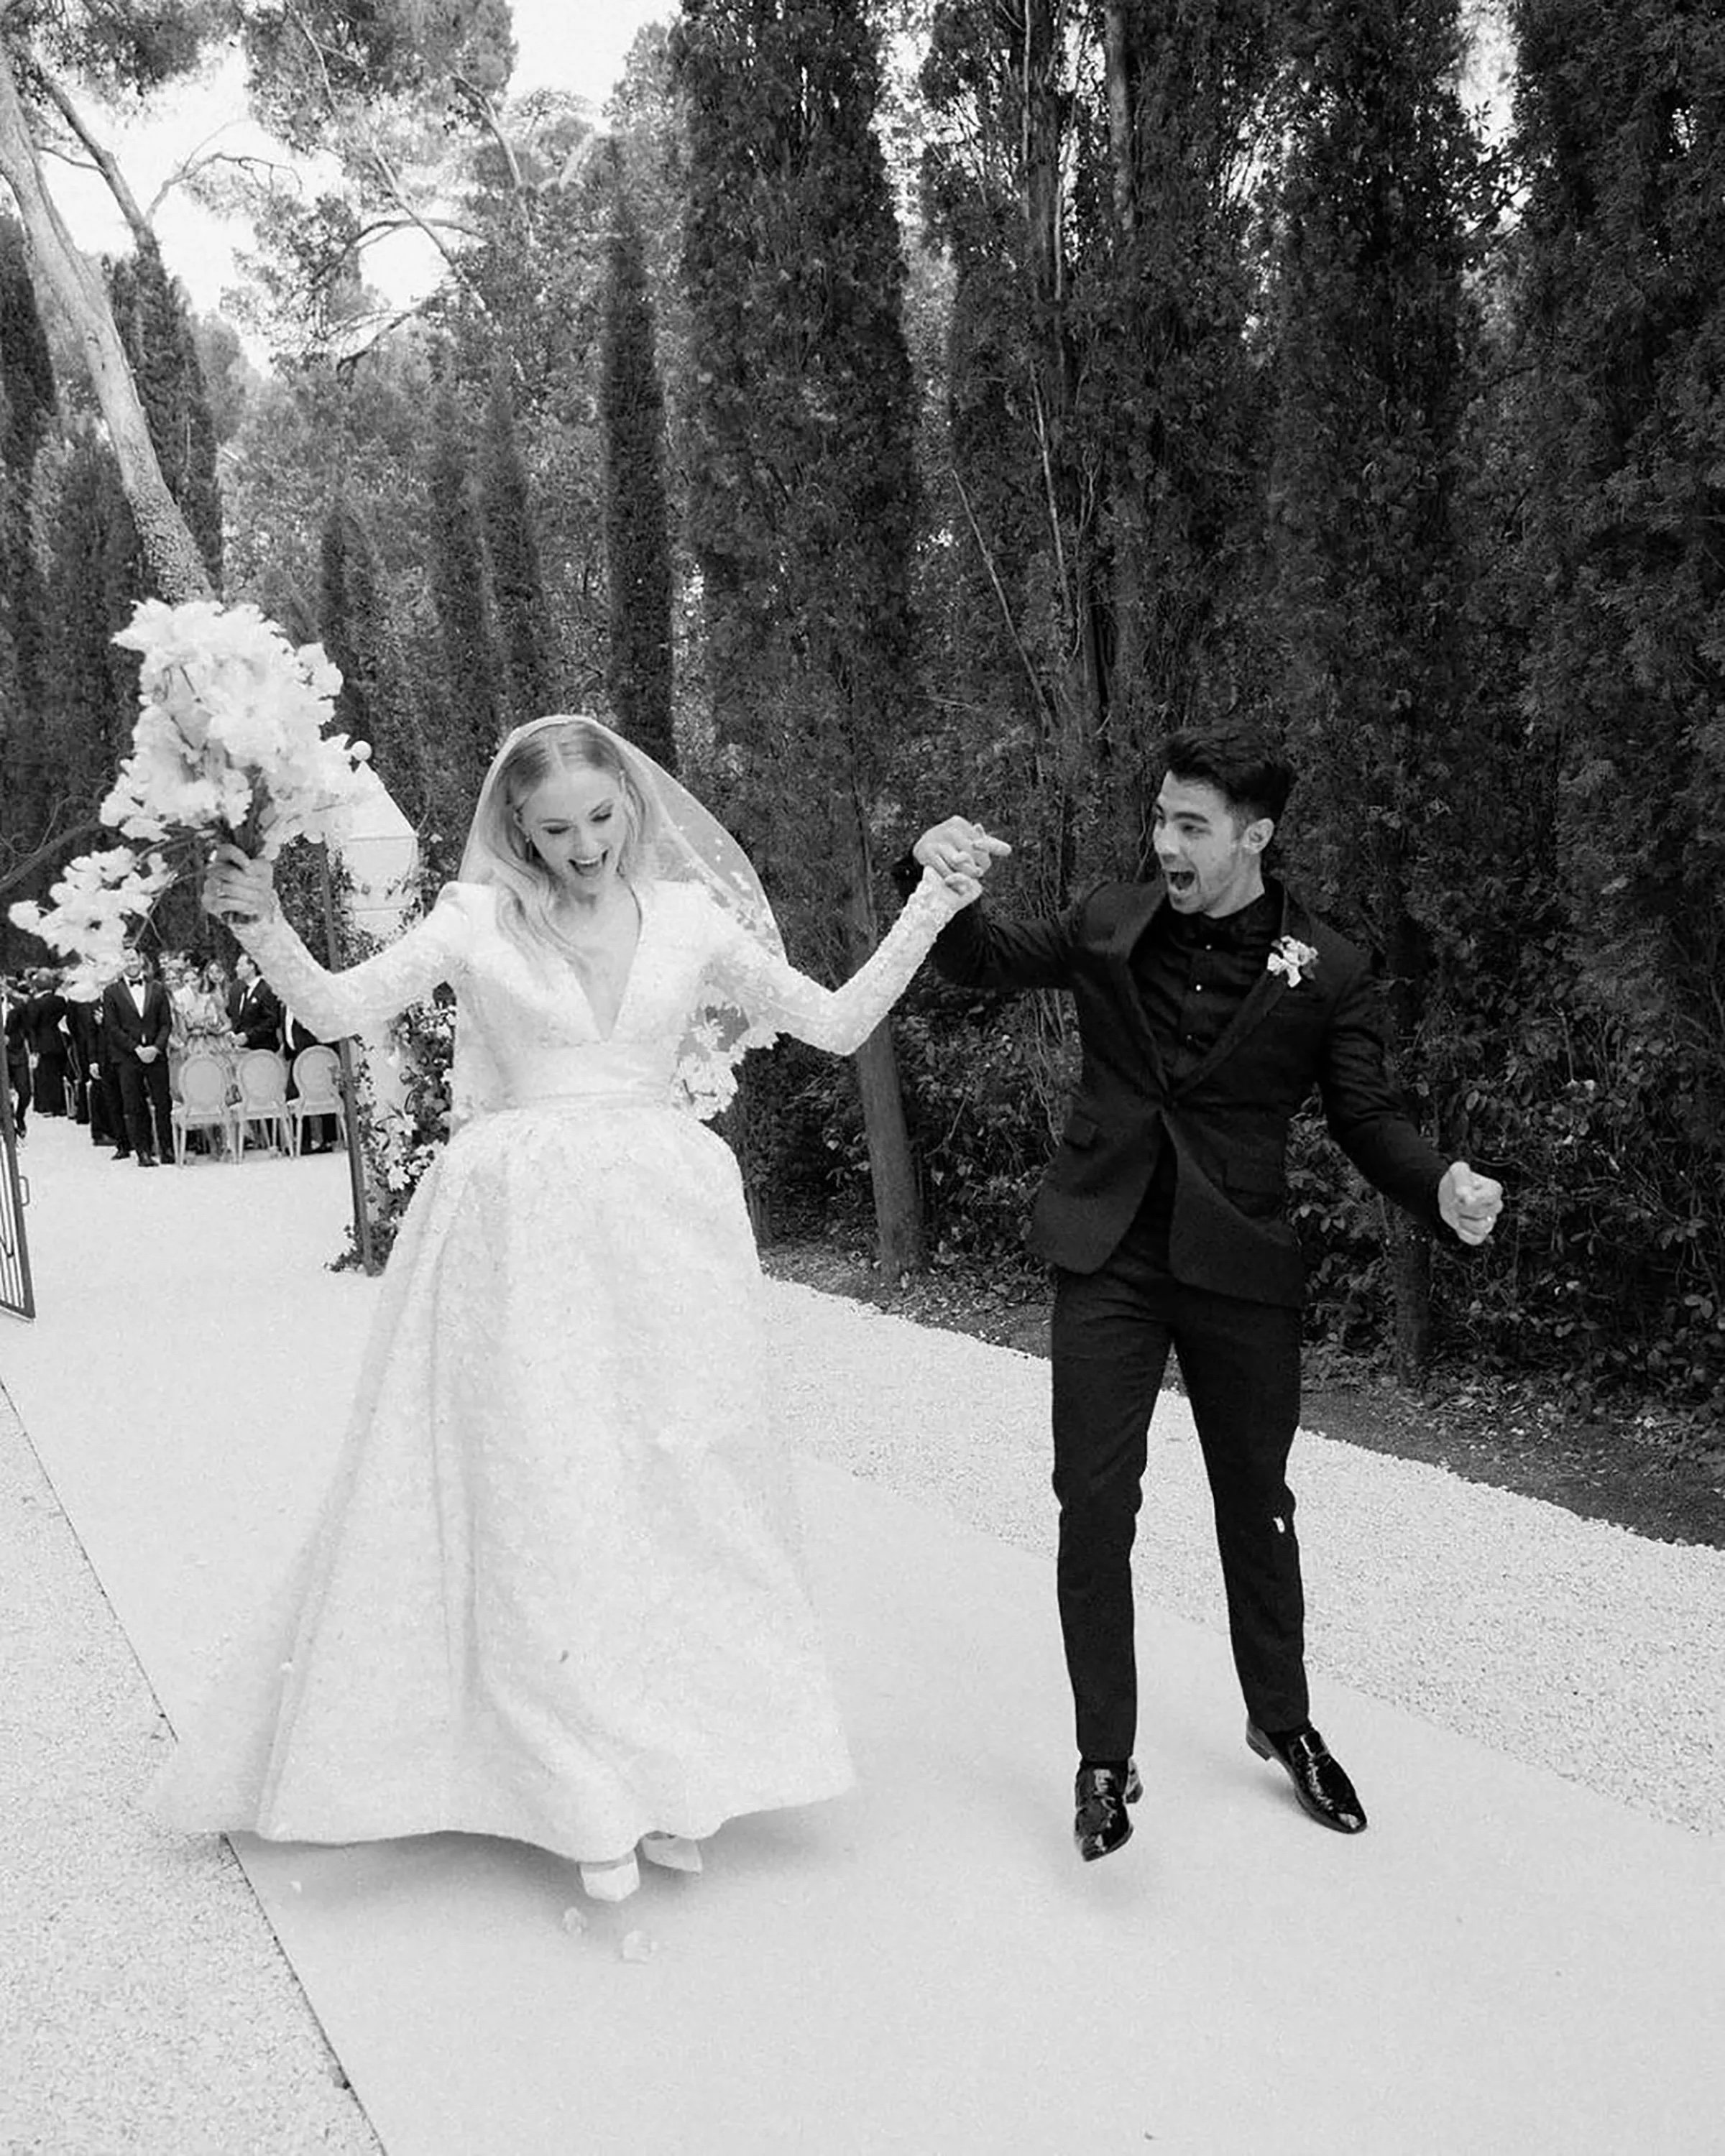 Sophie Turner's Wedding Dress - The First Official Photos Of The Louis  Vuitton Gown Have Arrived